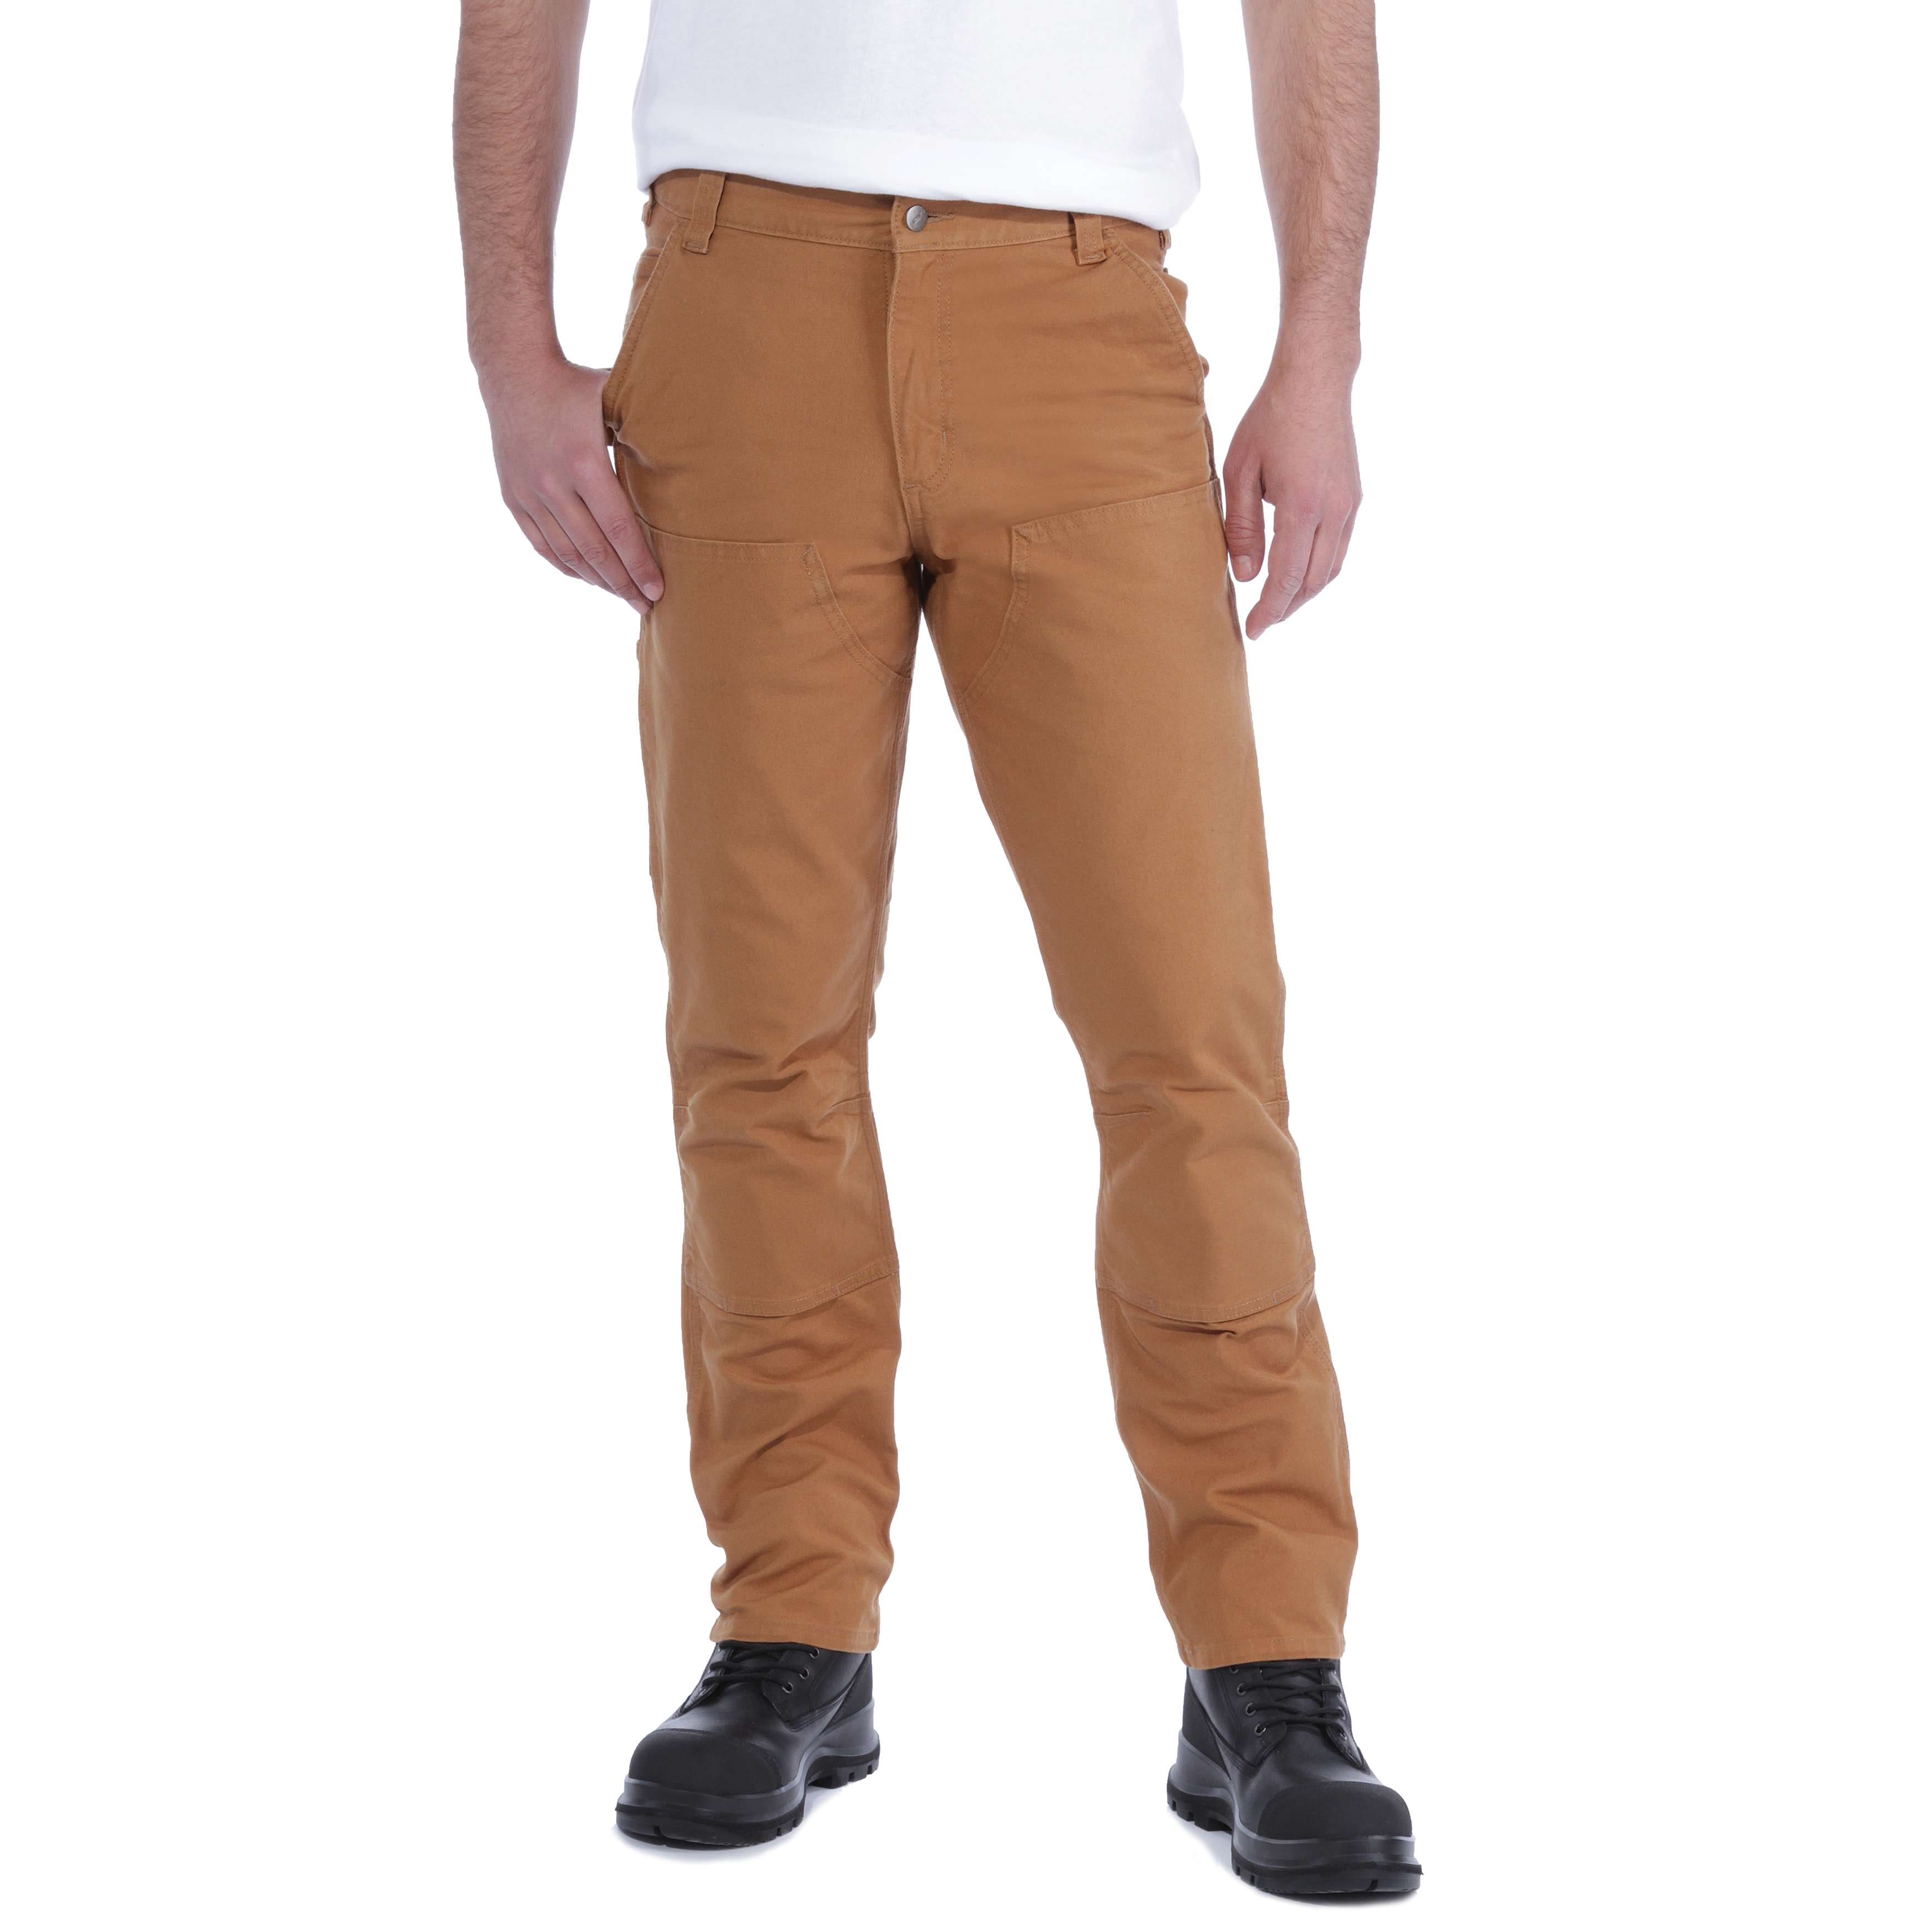 RUGGED FLEX™ STRAIGHT FIT DUCK DOUBLE-FRONT UTILITY WORK PANT